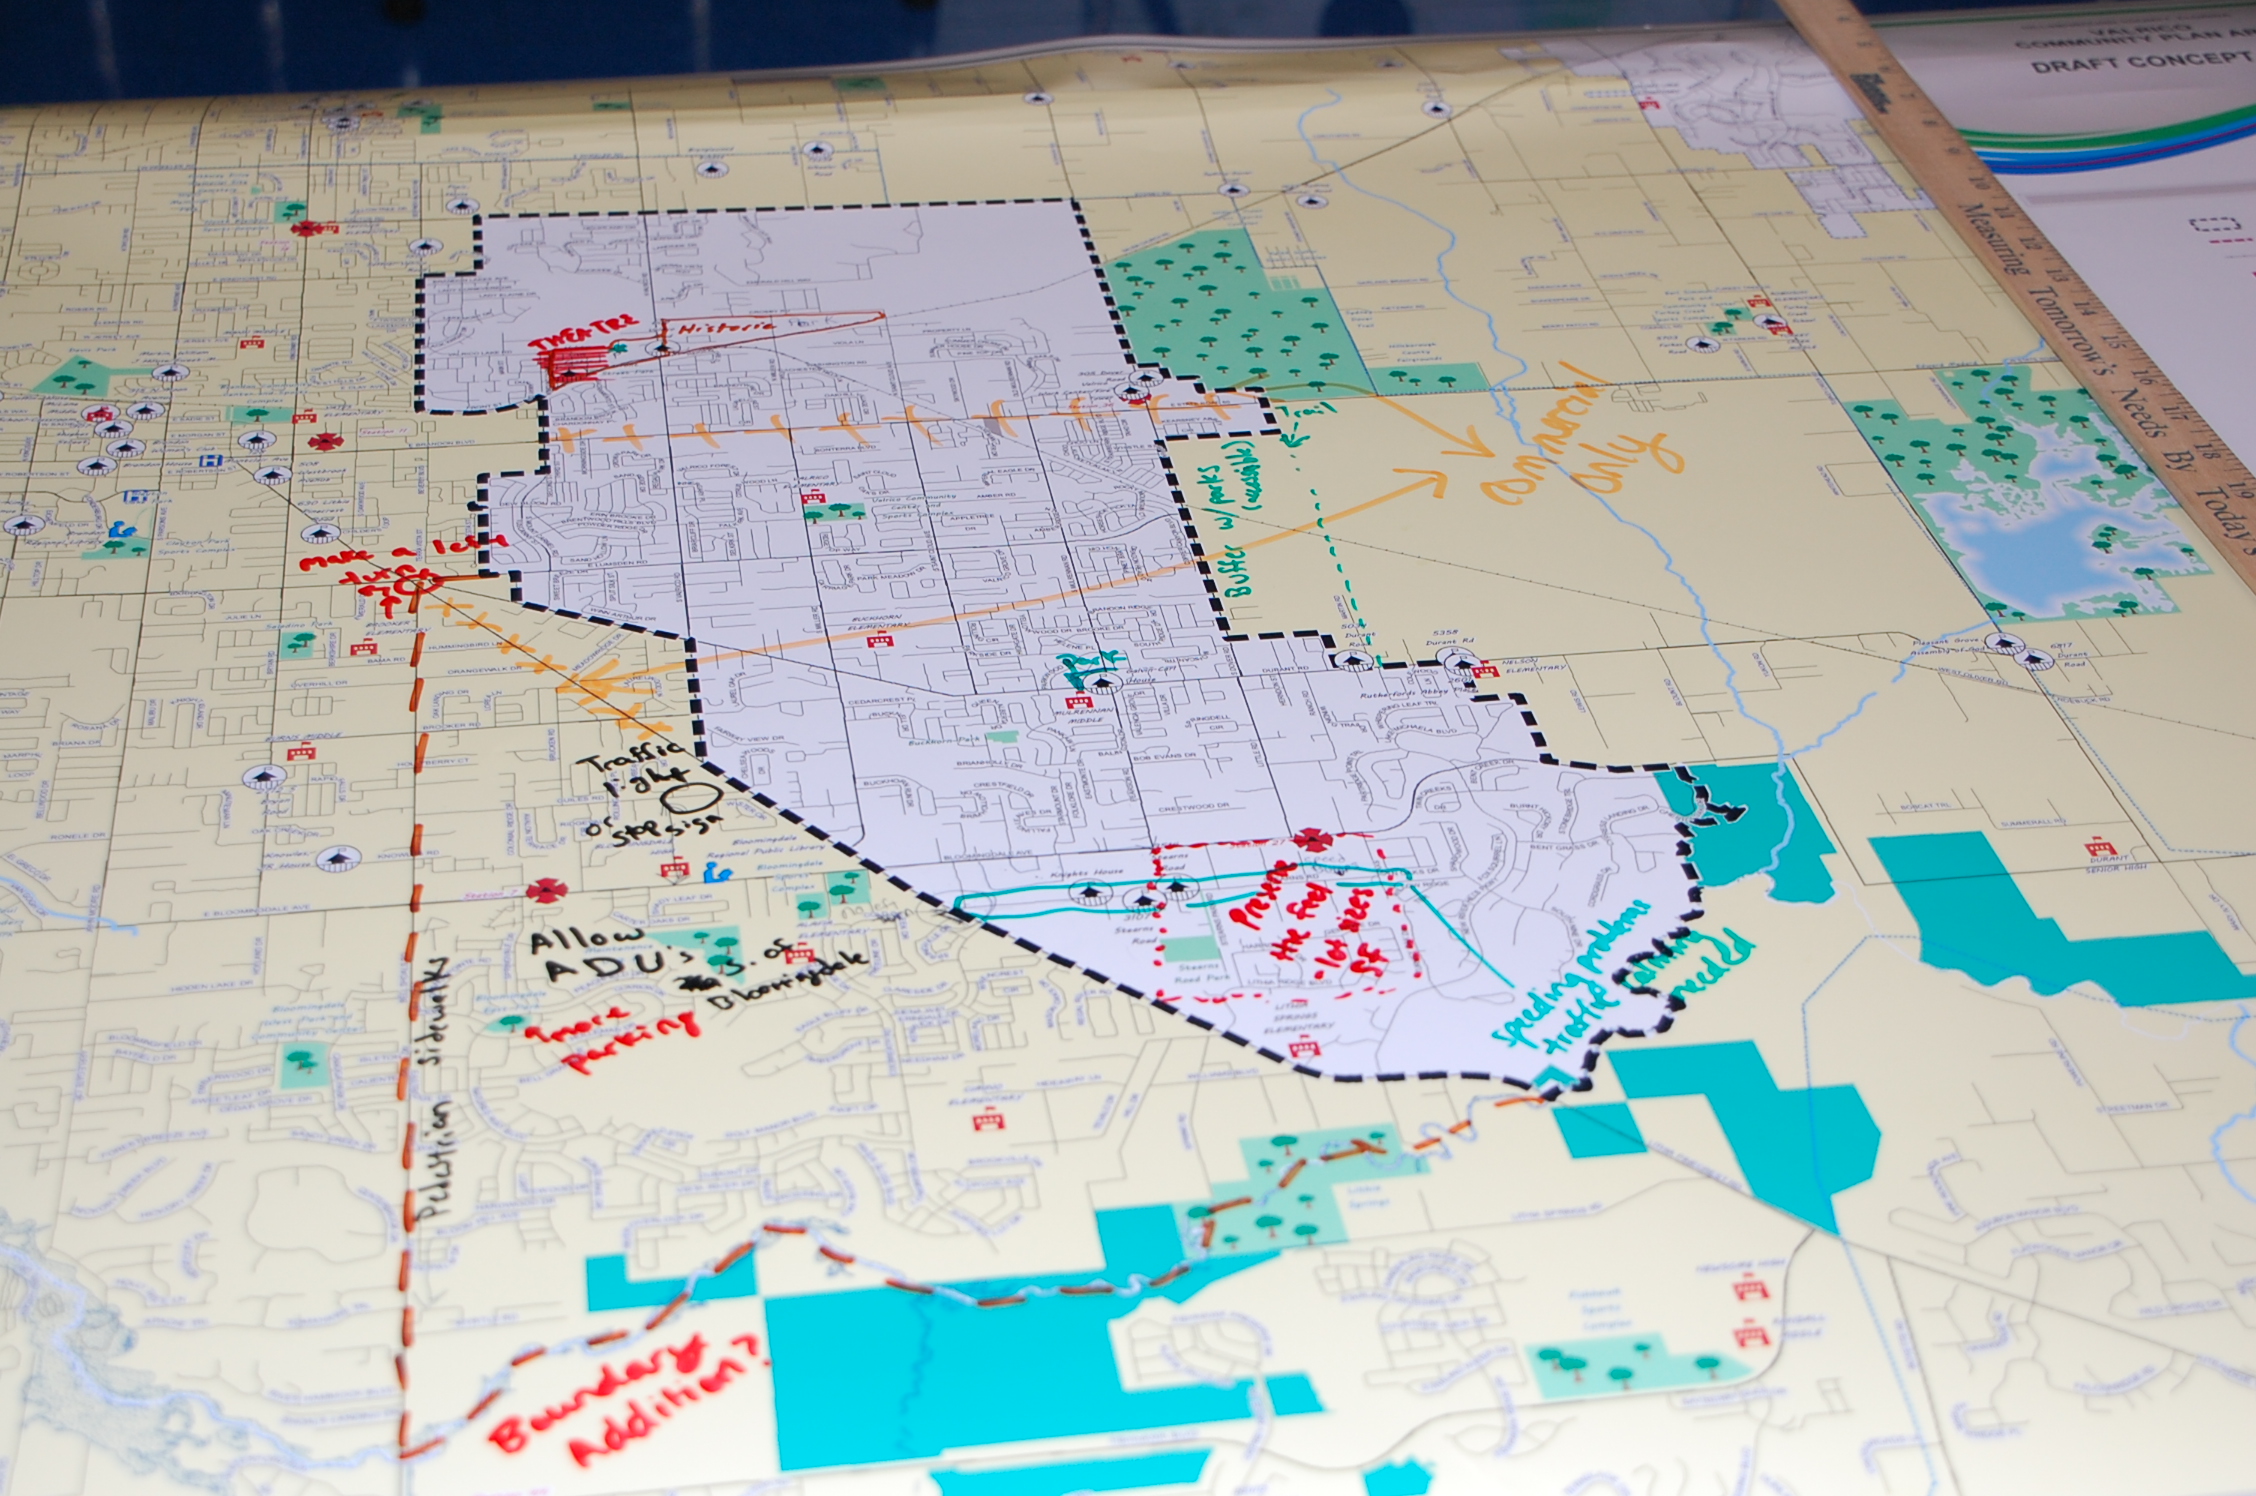 A printed map of the Valrico Community Plan boundary with additional notes added with marker.